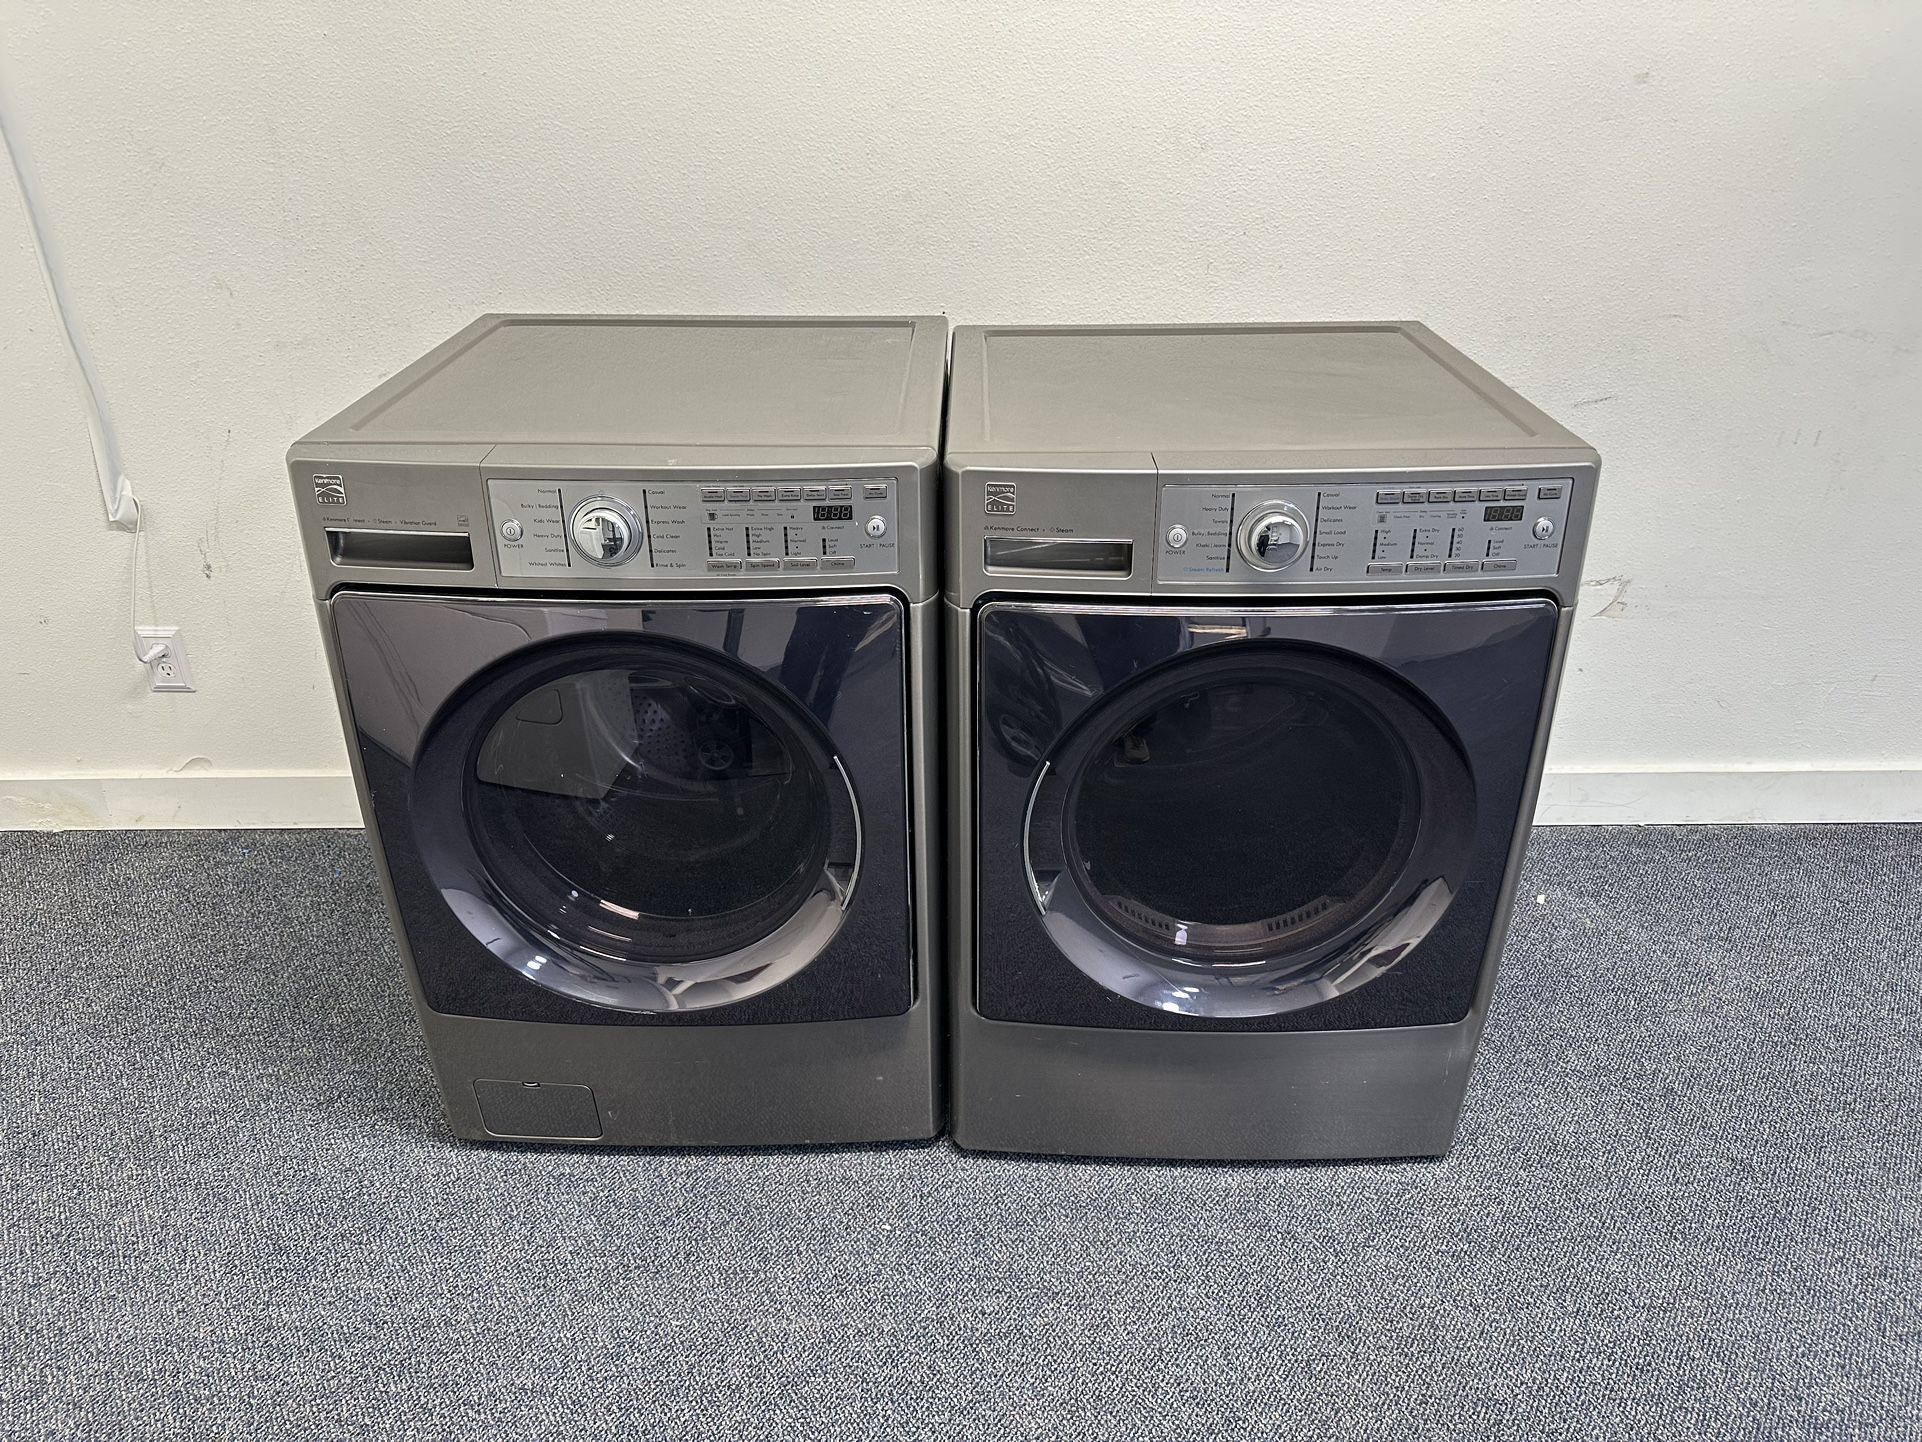 KENMORE ELITE WASHER DRYER ELECTRIC STACKABLE 